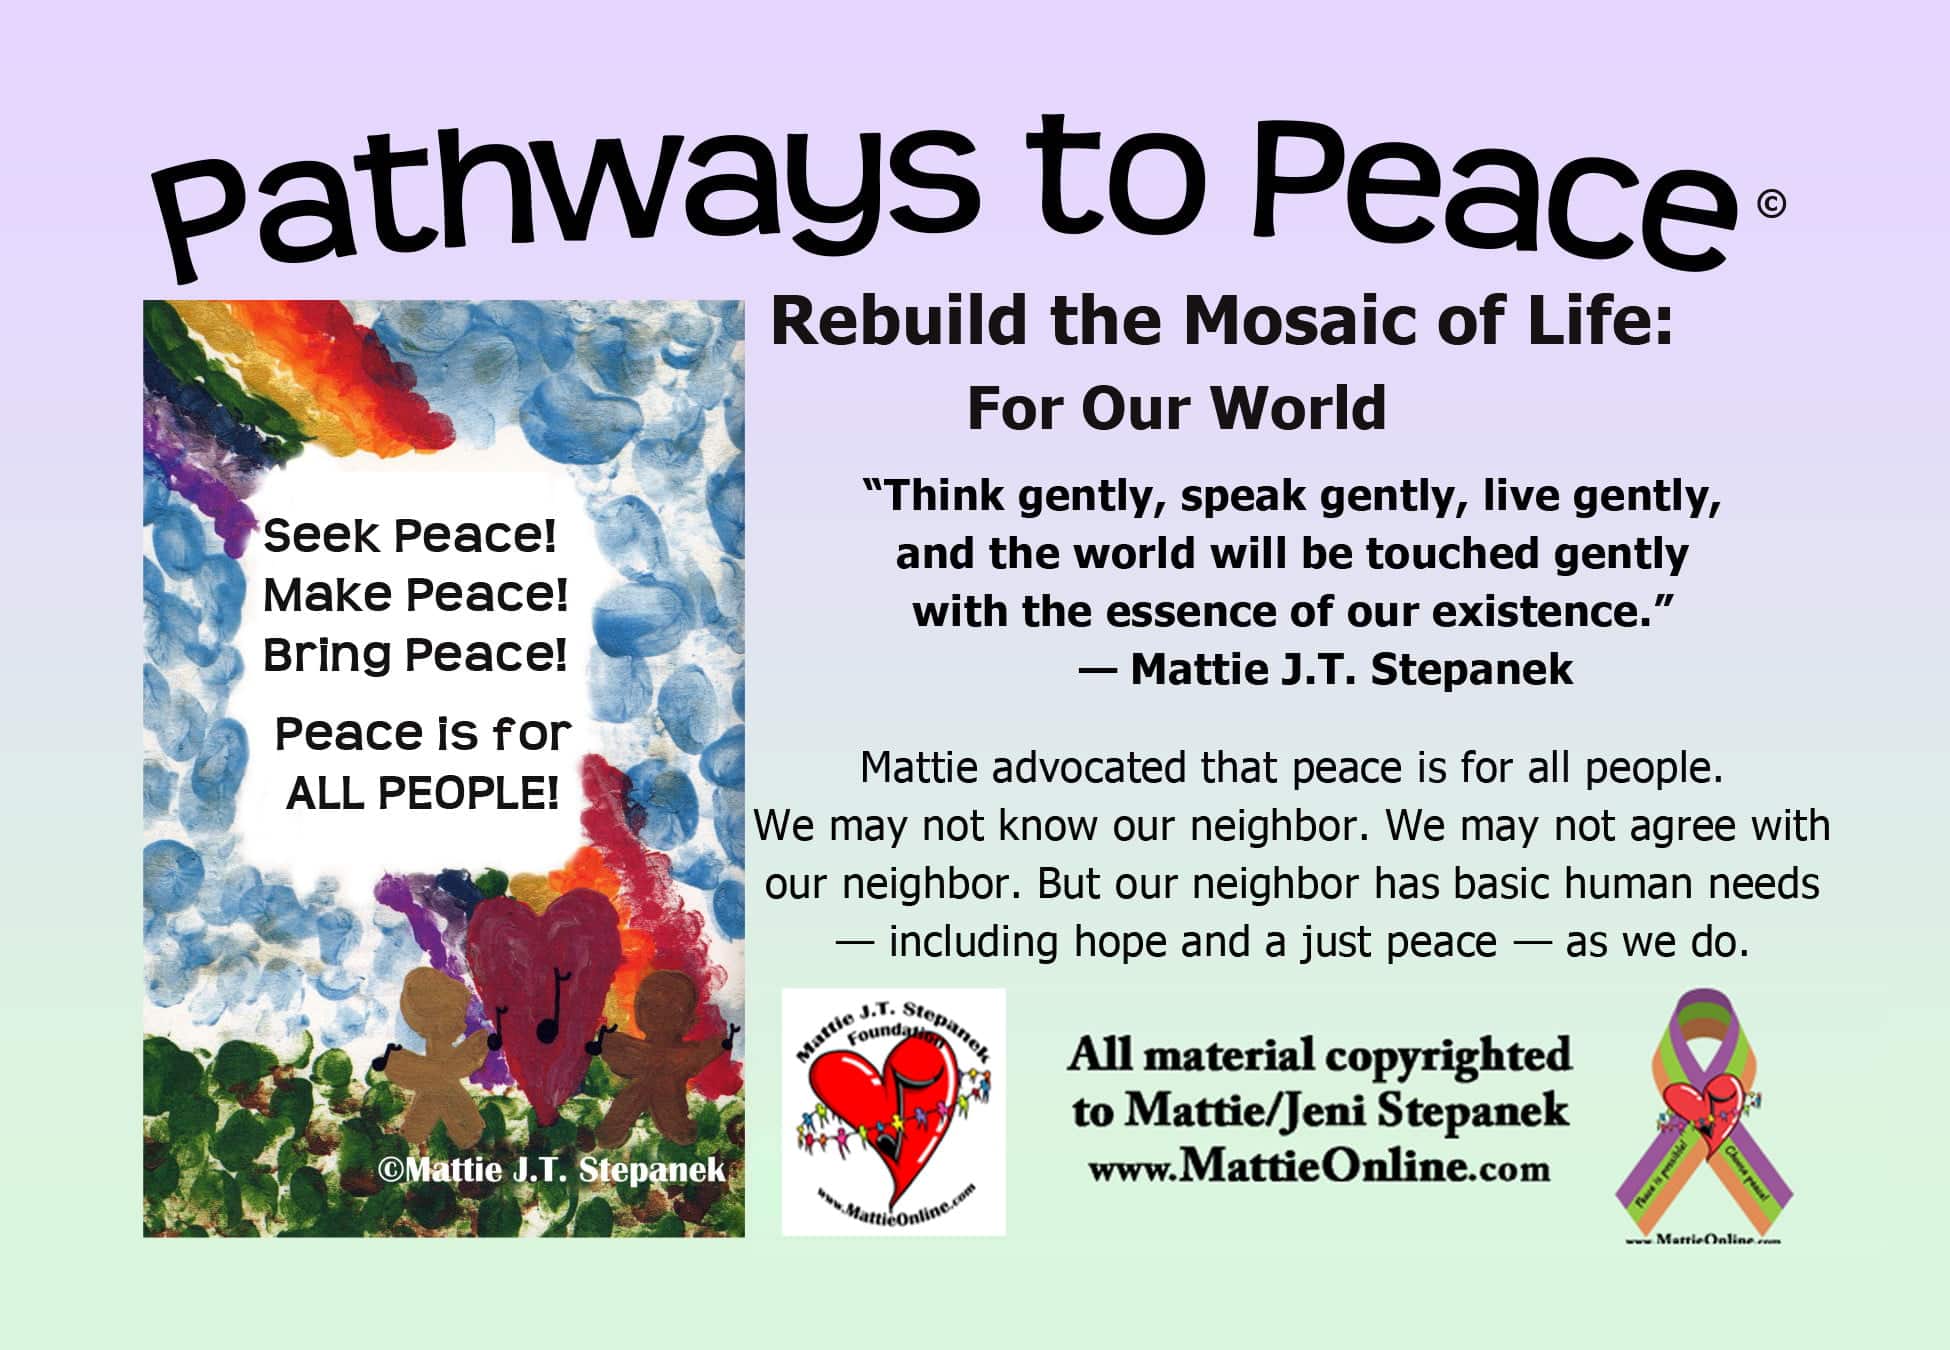 Pathways to Peace rebuild the mosaic